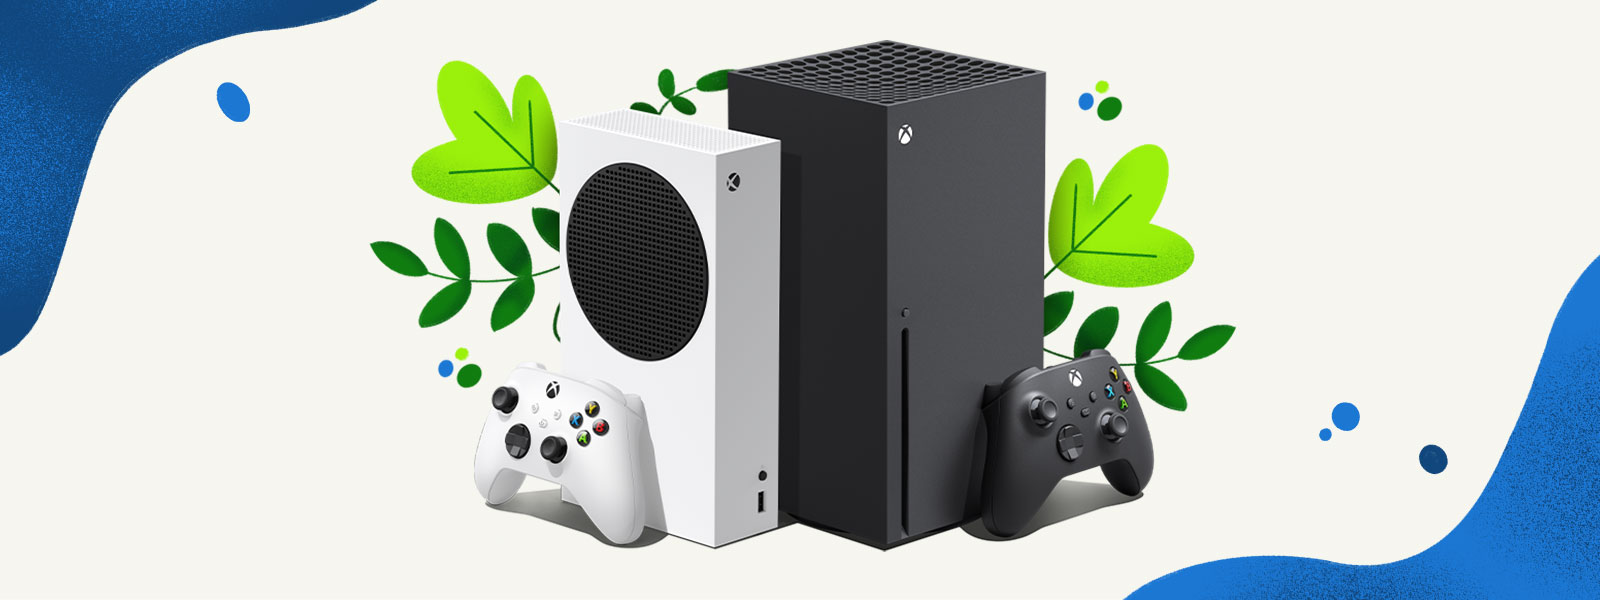 The Xbox Series X and Xbox Series S consoles sit next to each other in front of a decorative background of plants and splashes of blue water.